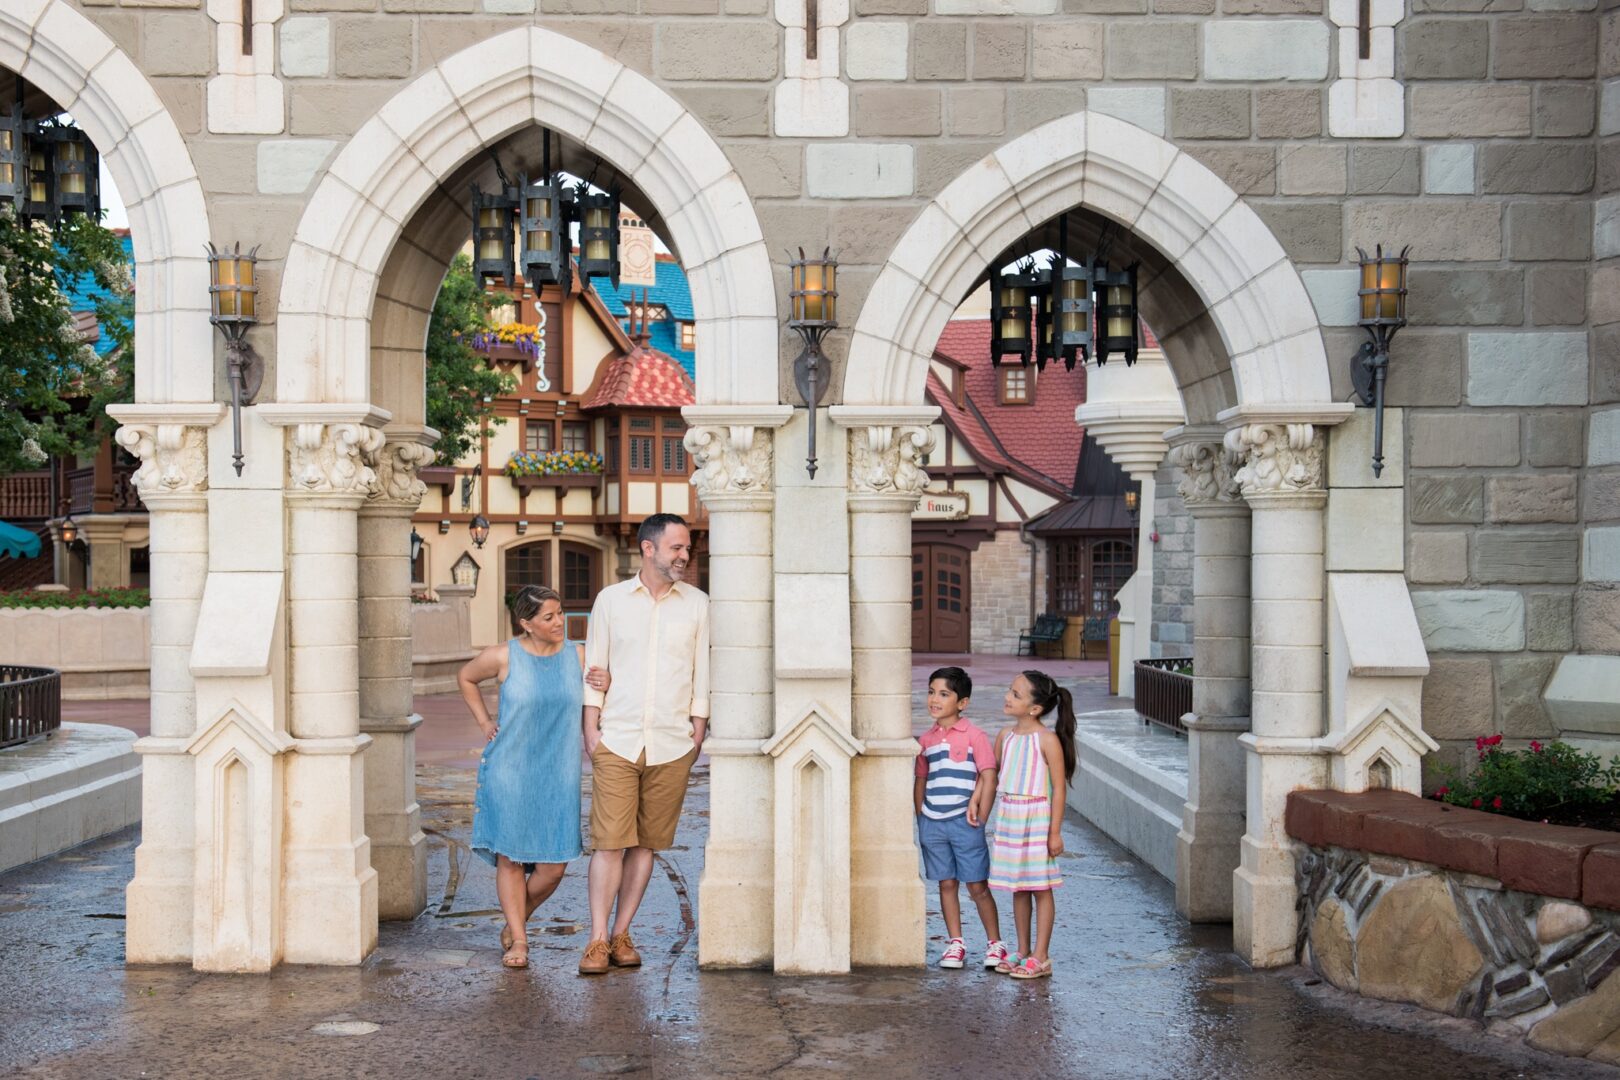 NEW Private PhotoPass Sessions Coming to Fantasyland in Magic Kingdom